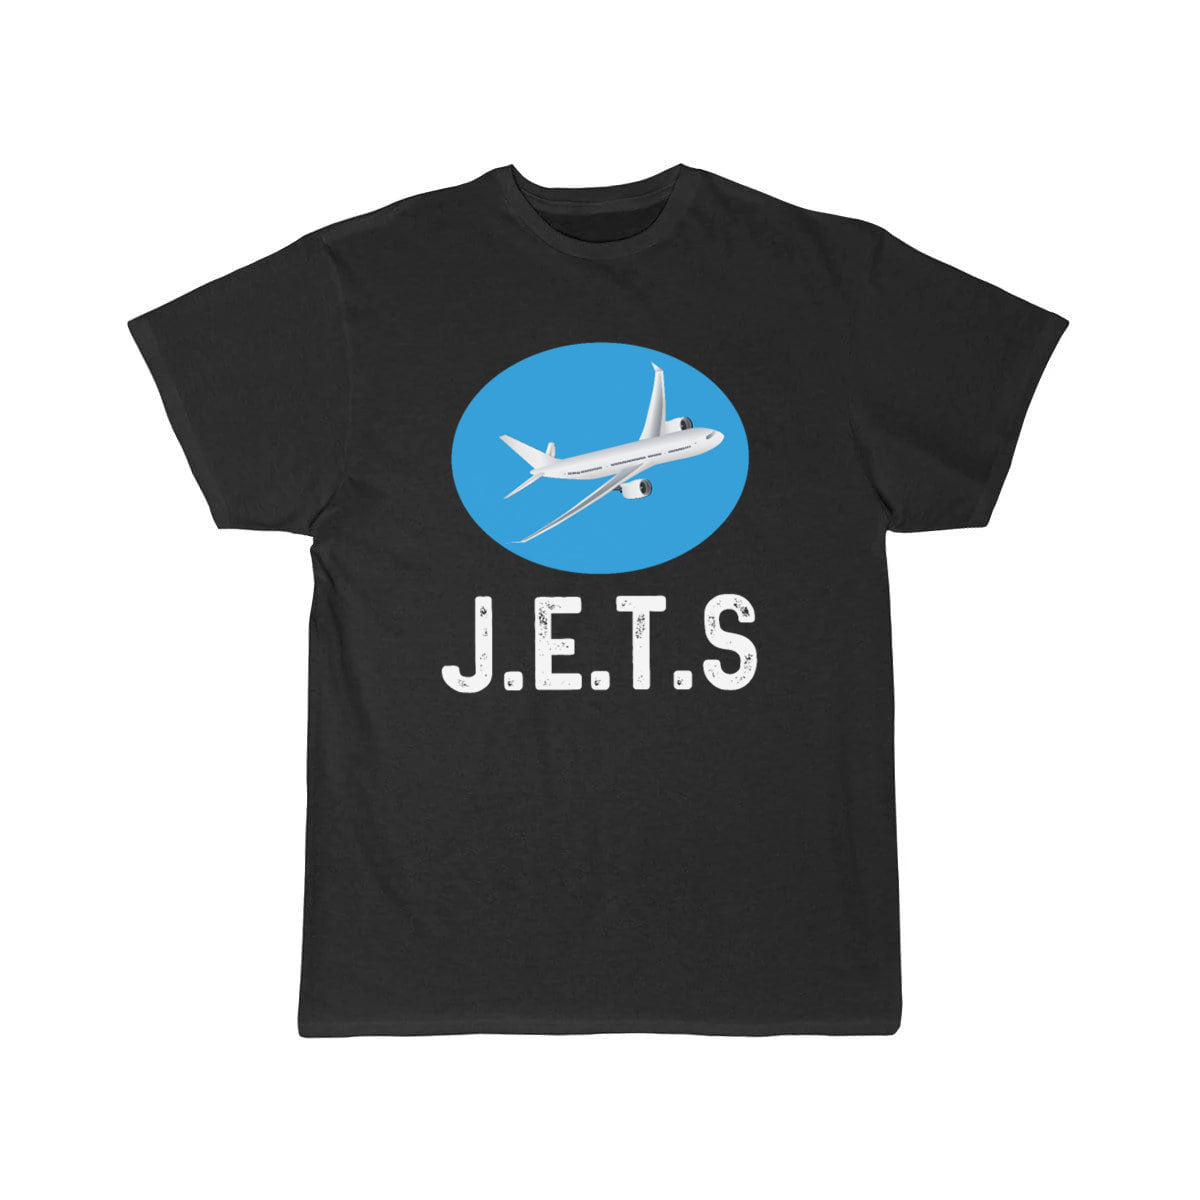 Jets Aircraft Fighter Airplane T SHIRT THE AV8R